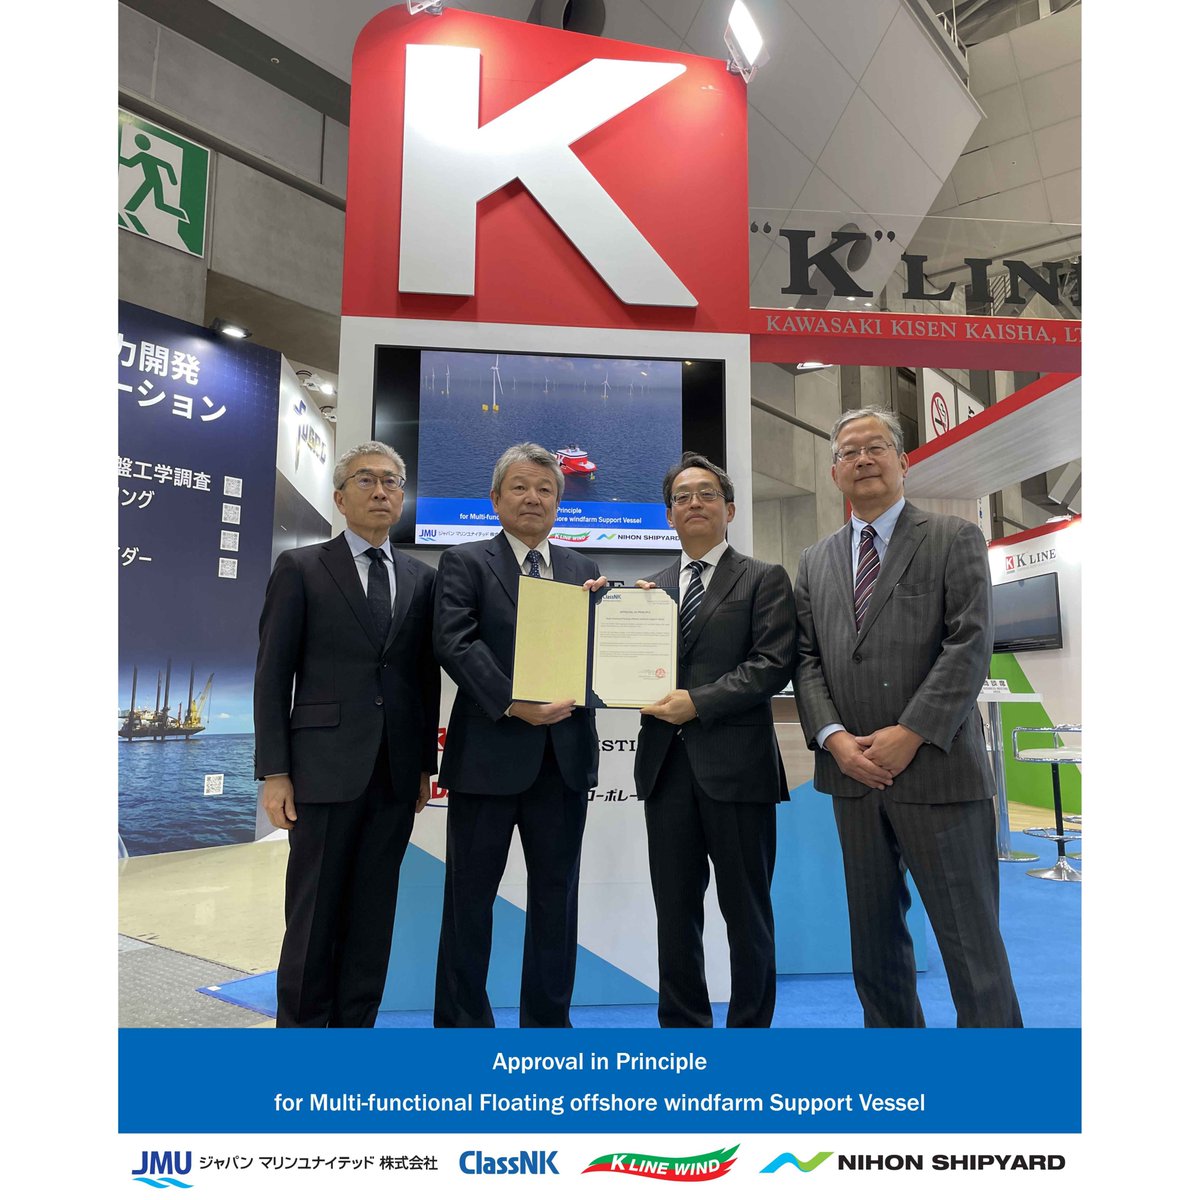 ClassNK awards approval in principle (AiP) for Multi-functional Floating offshore windfarm Support Vessel developed by “K” Line Wind Service, Japan Marine United, and Nihon Shipyard classnk.or.jp/hp/en/hp_news.… #RenewableEnergy #OffshoreWind #WindExpo2024